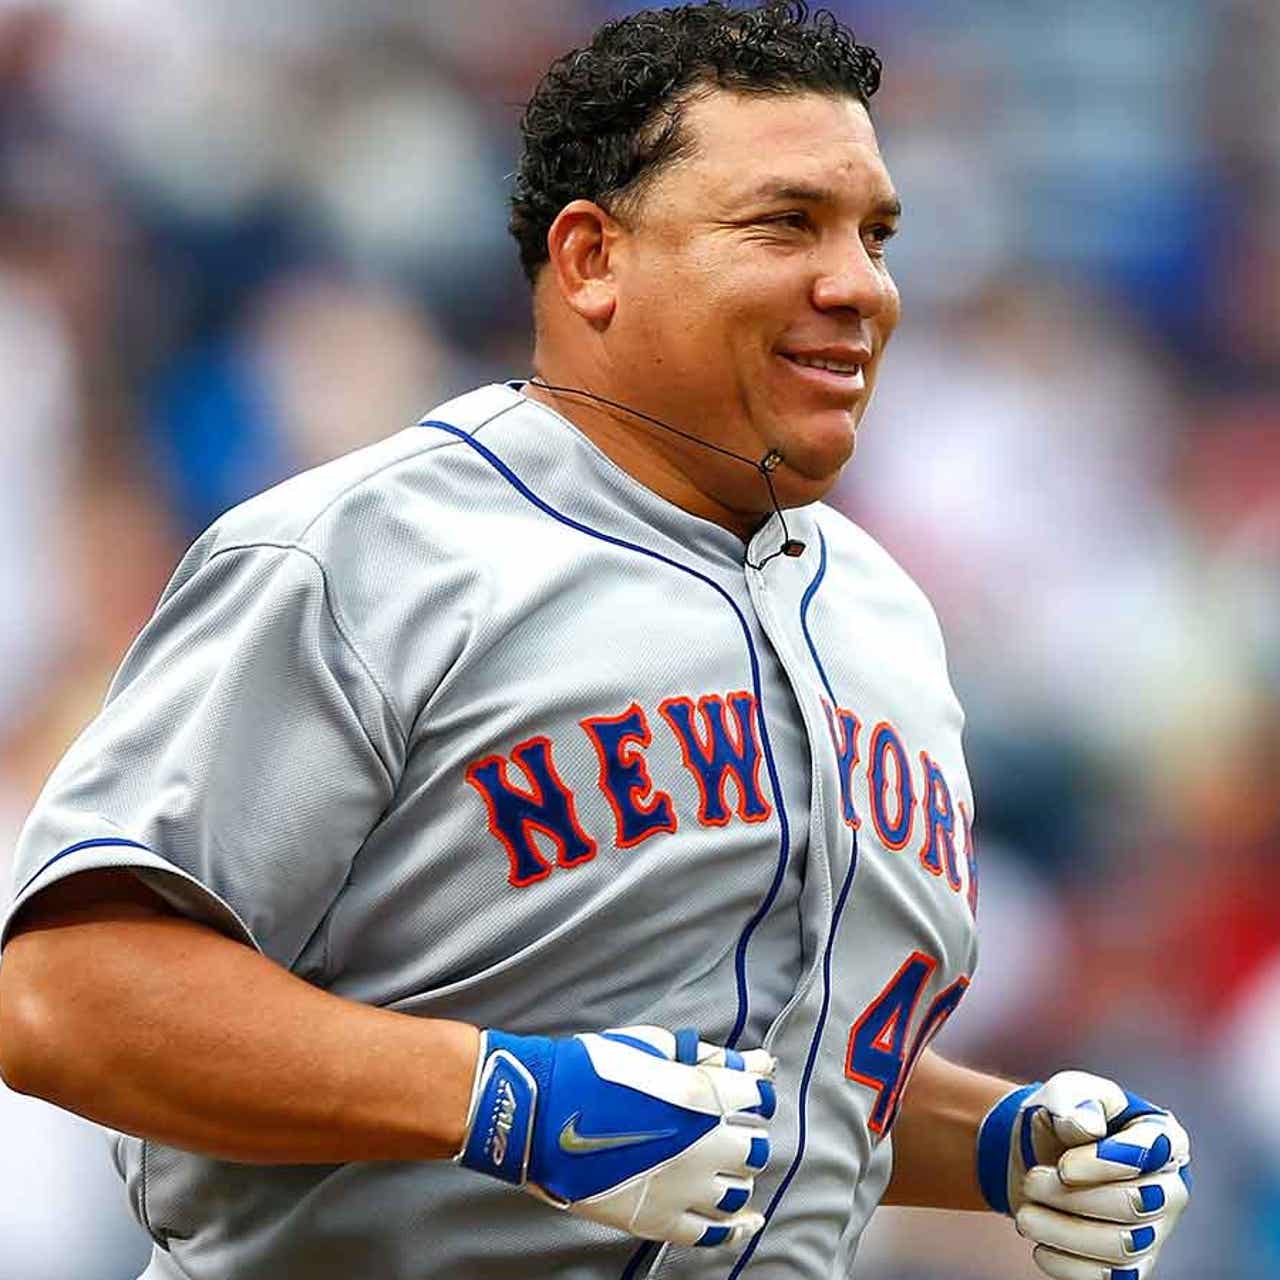 Does it get any better than Bartolo Colon playing catch on a beach